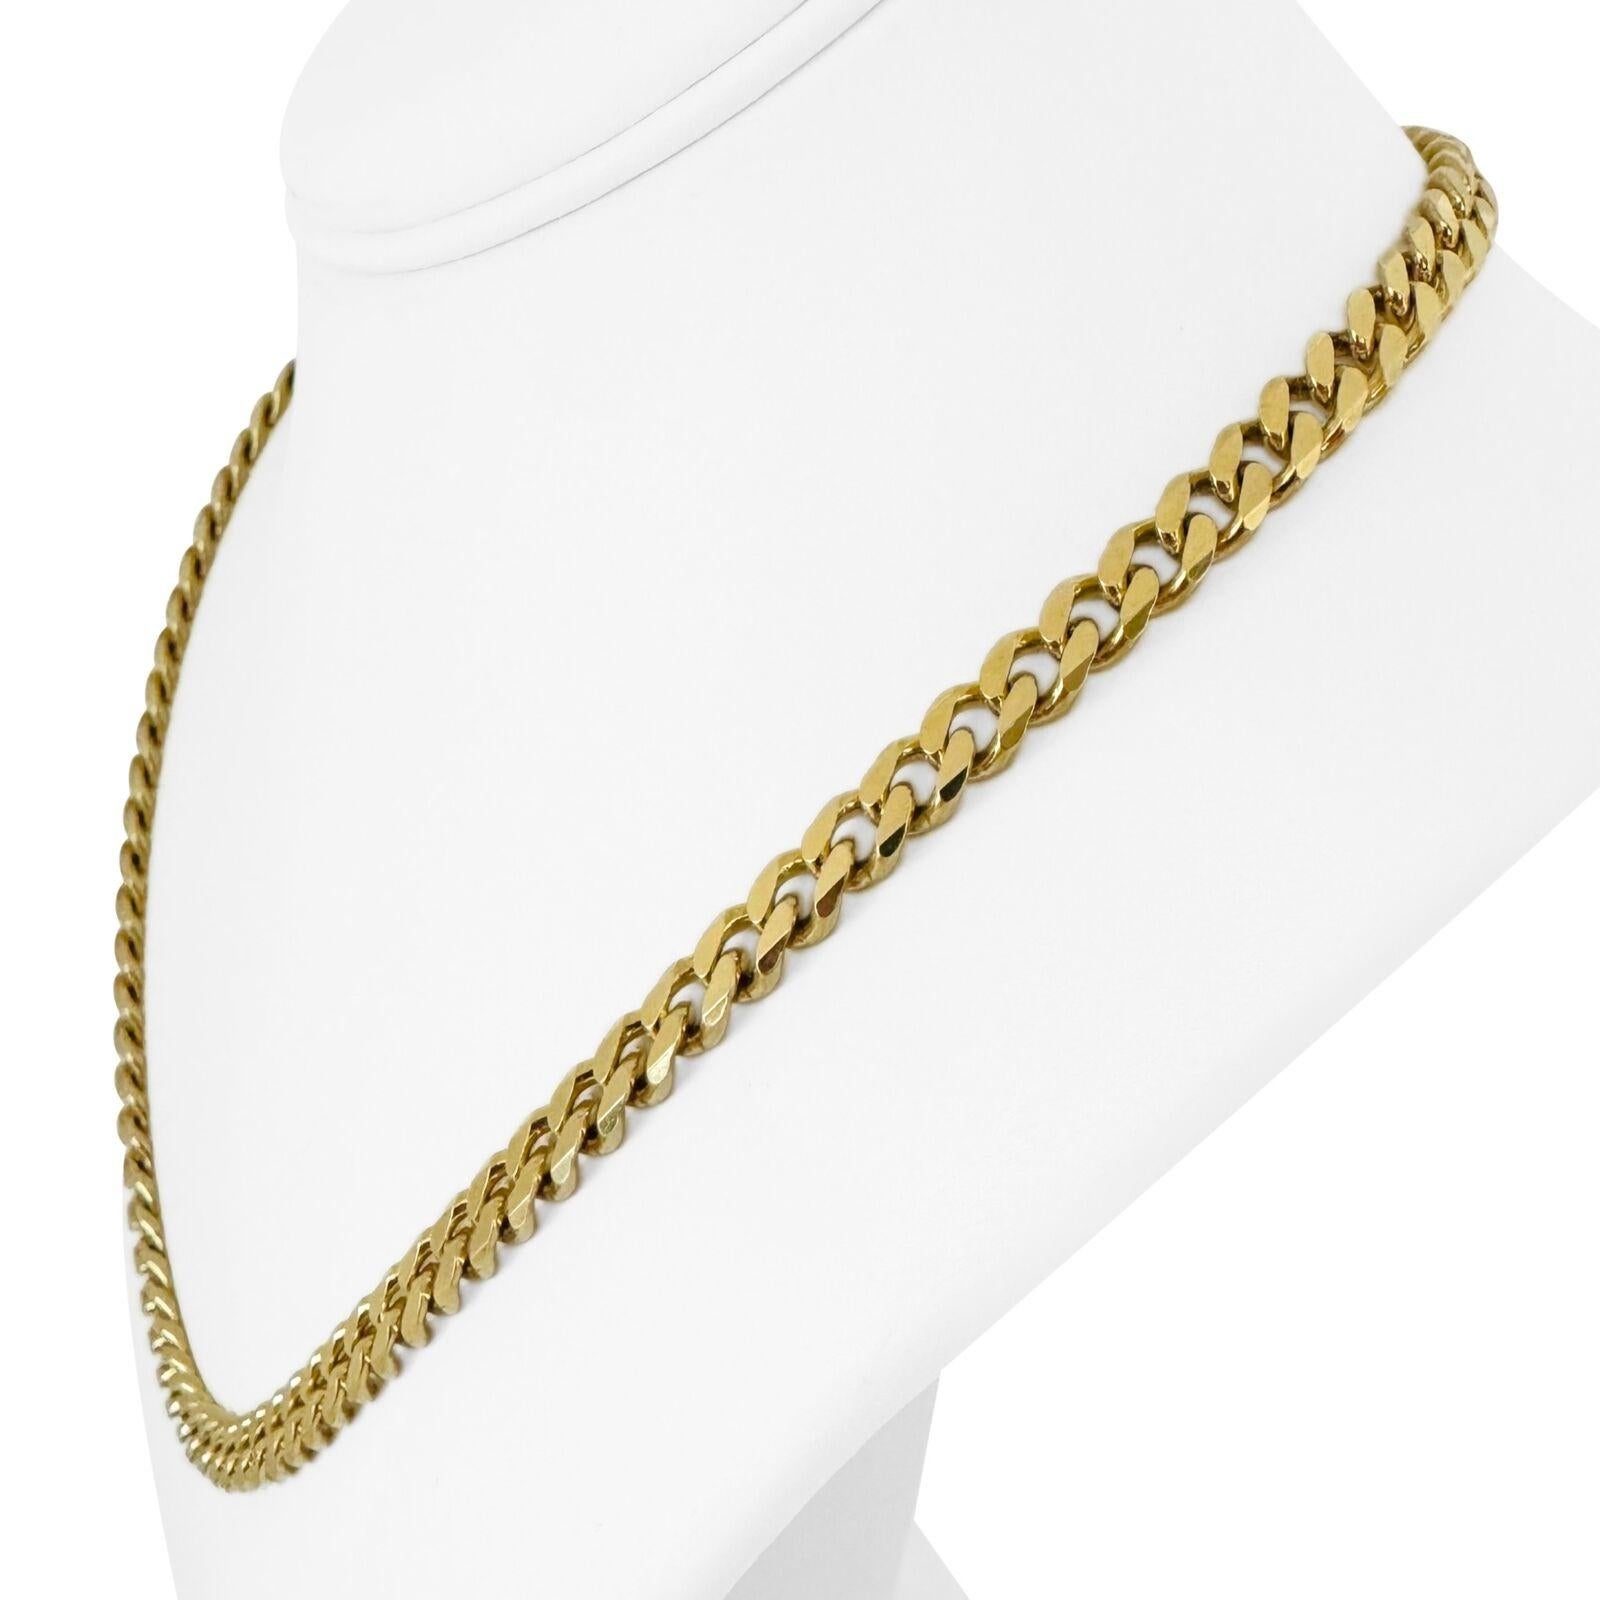 14k Yellow Gold 49.6g Solid Heavy 6mm Curb Link Chain Necklace Italy 20